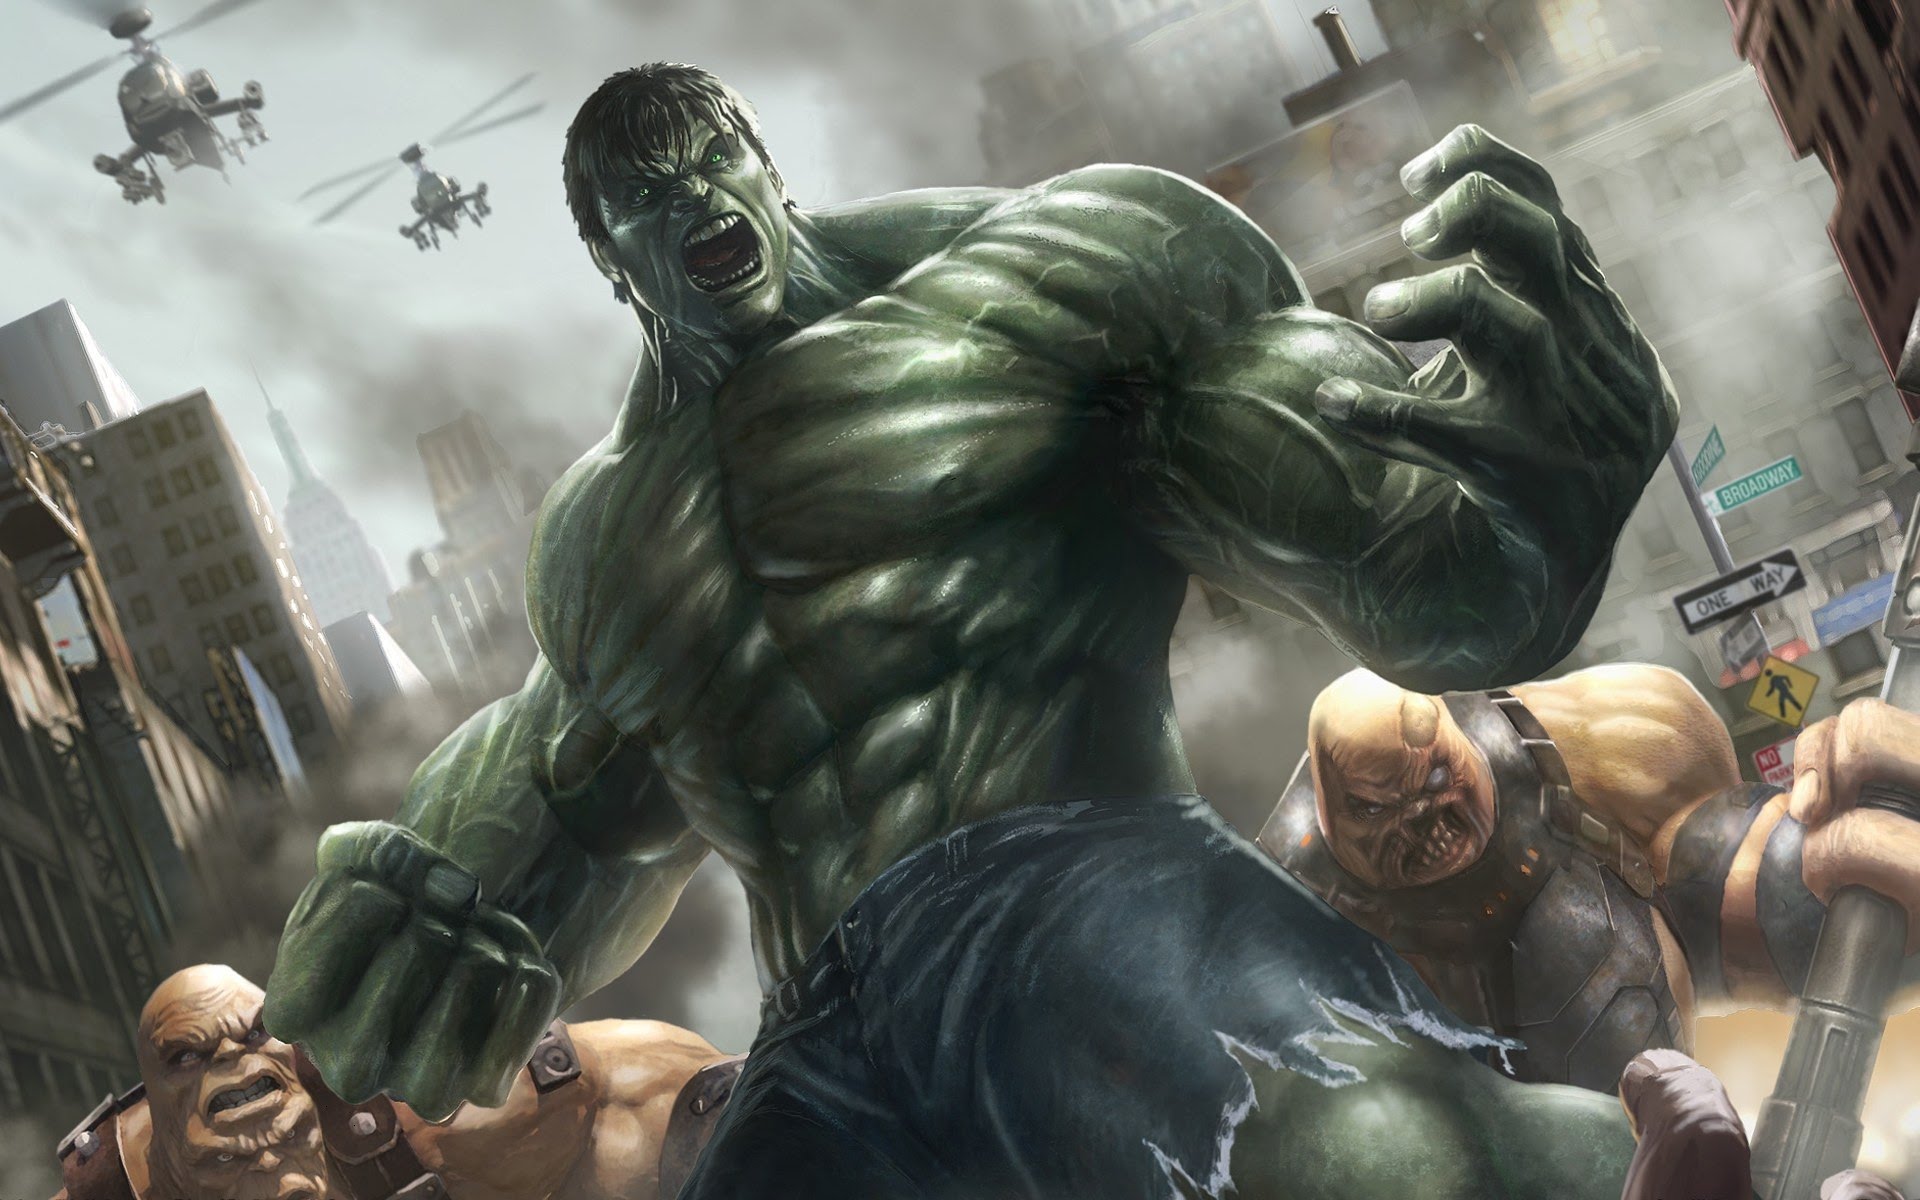 Incredible Hulk Backgrounds, Compatible - PC, Mobile, Gadgets| 1920x1200 px